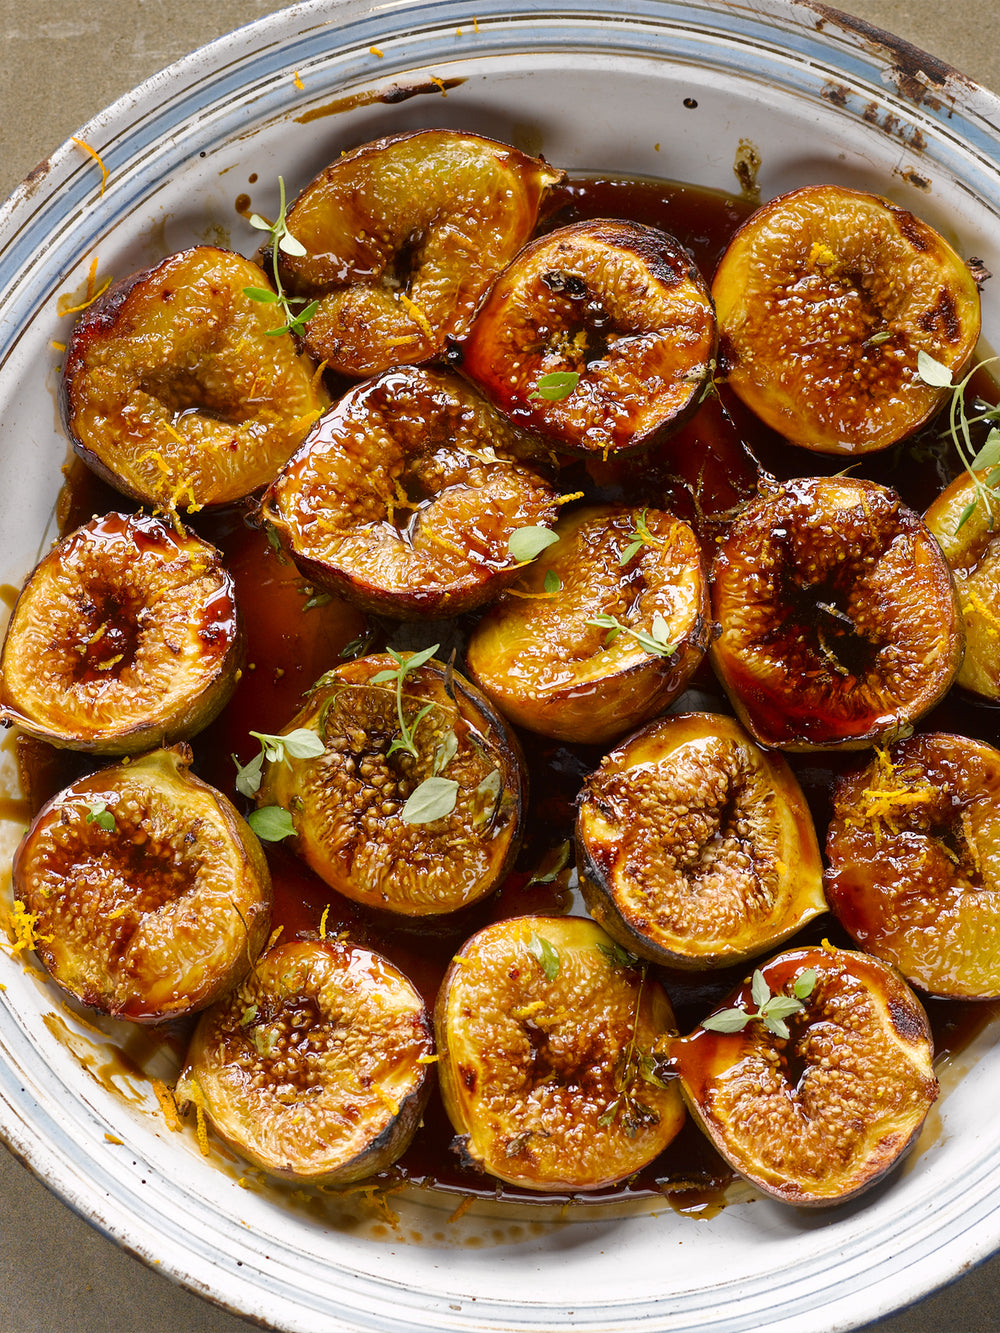 Roasted figs with pomegranate molasses and orange zest